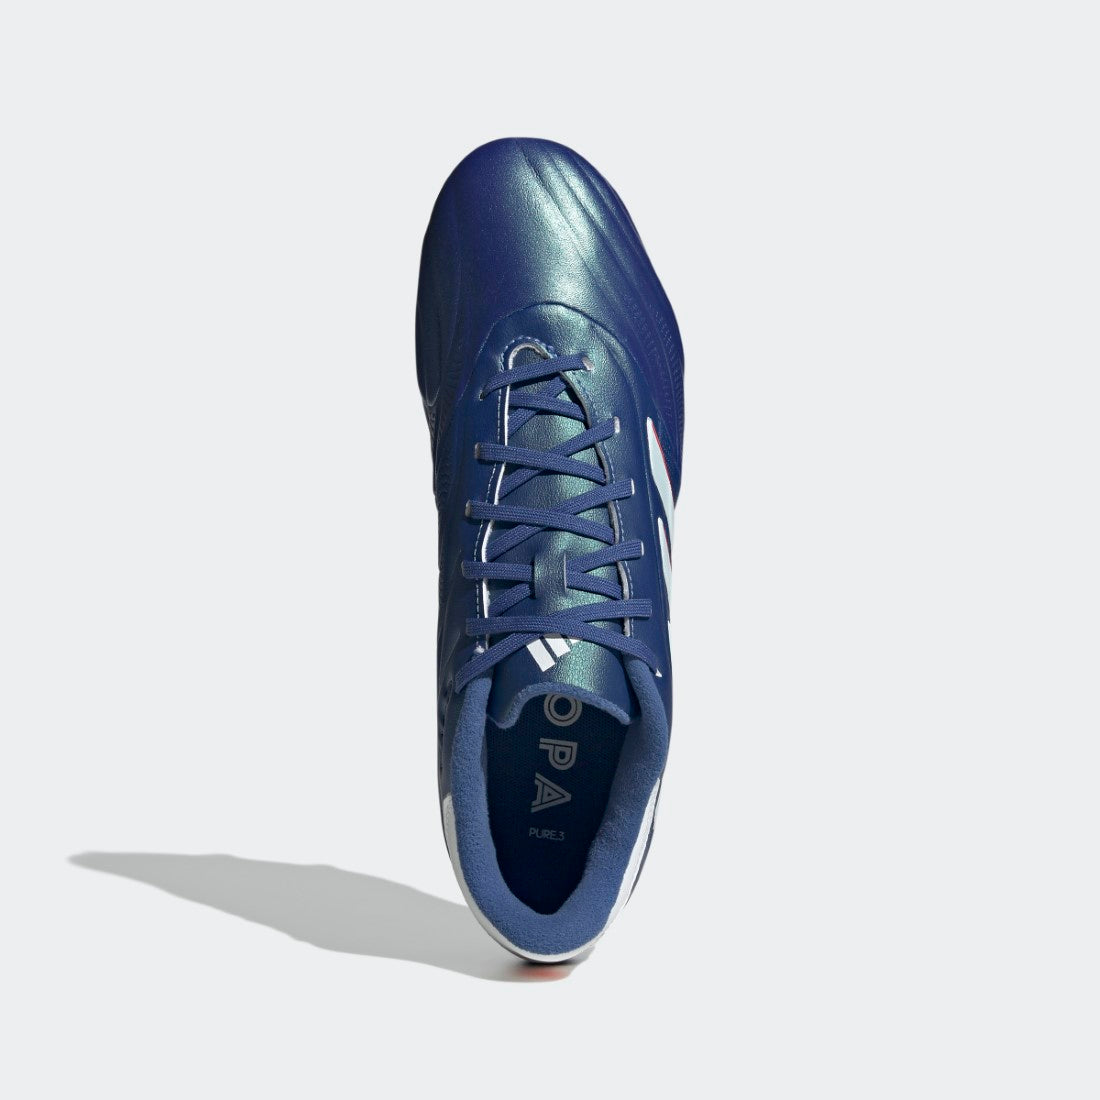 Copa Pure II.3 Firm Ground Boots